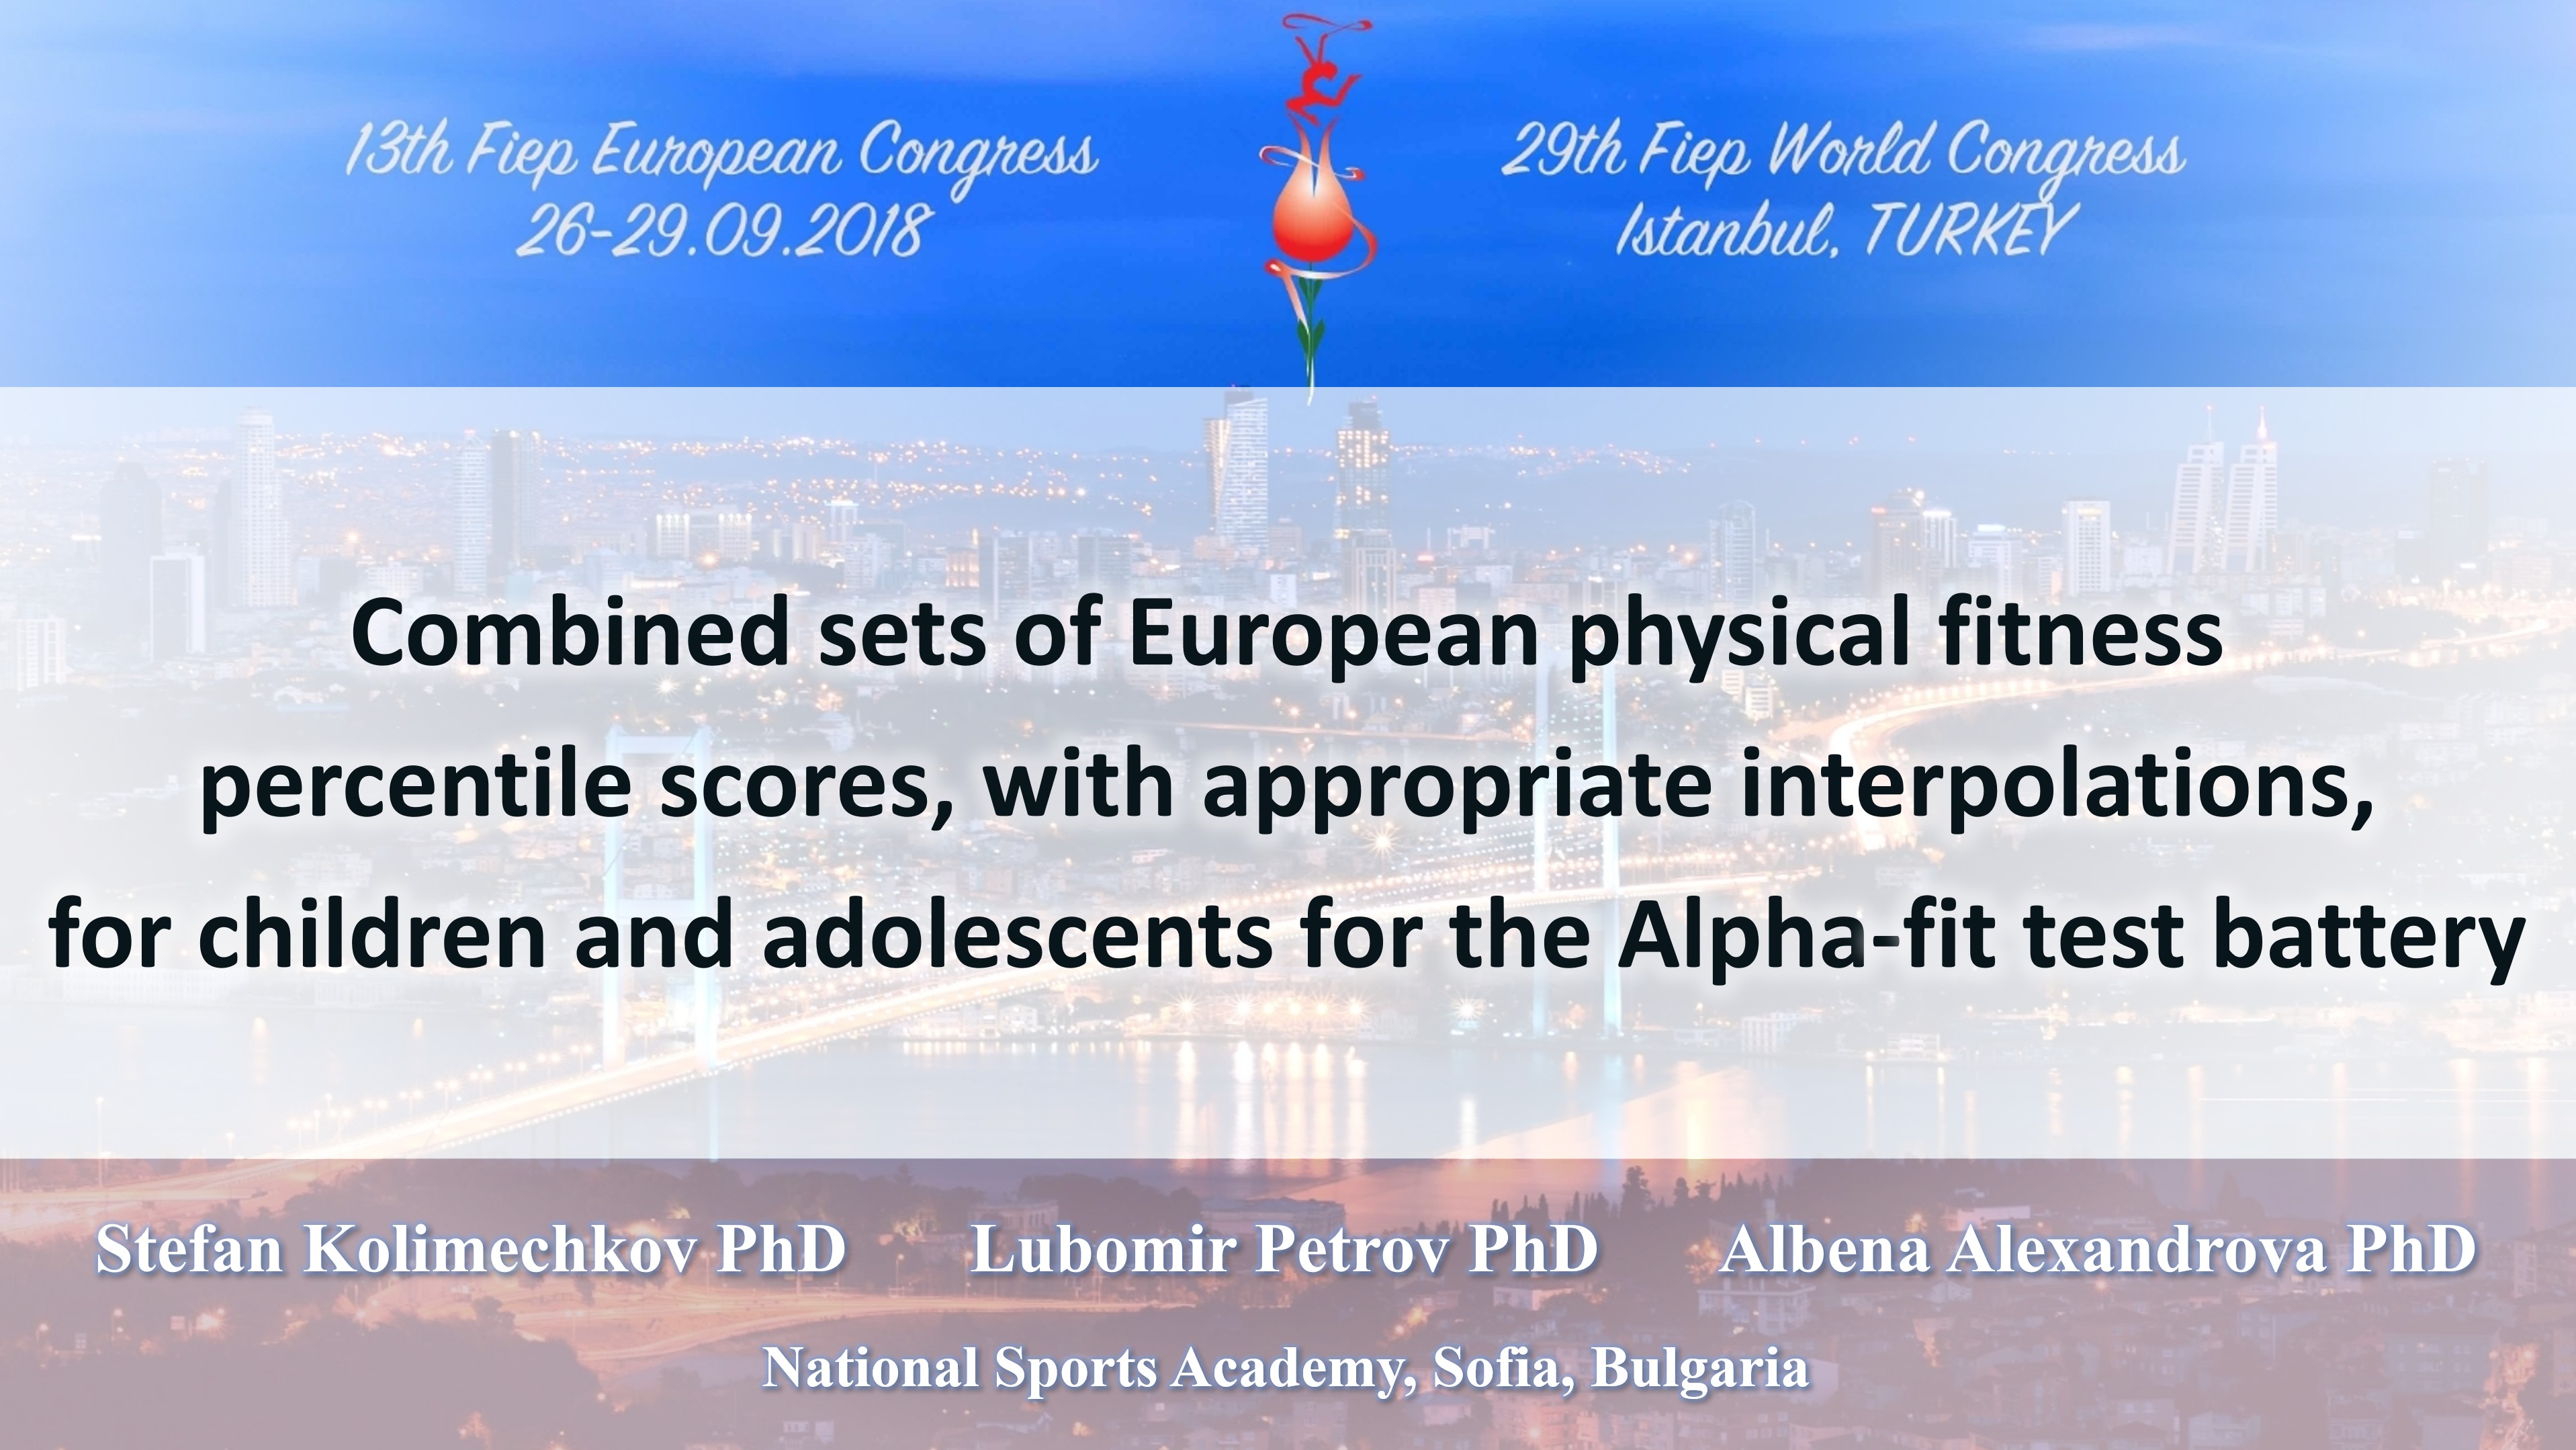 Combined sets of European physical fitness percentile scores, with appropriate interpolations, for children and adolescents for the Alpha-fit test battery at the FIEP Congress in Istanbul 2018